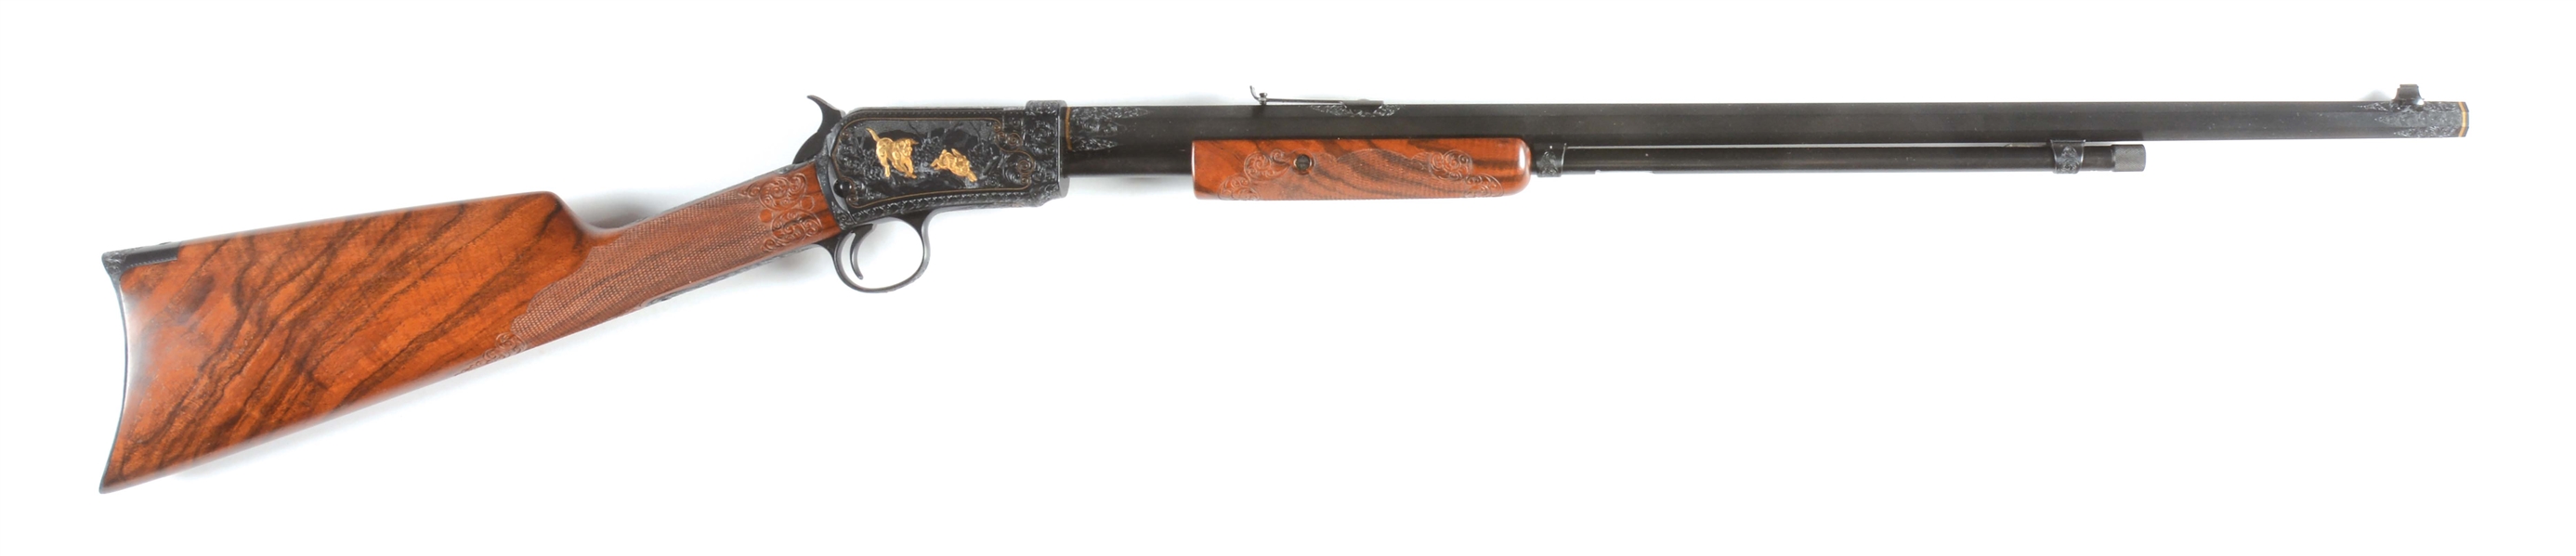 (C) WINCHESTER 1890 SLIDE ACTION RIFLE.